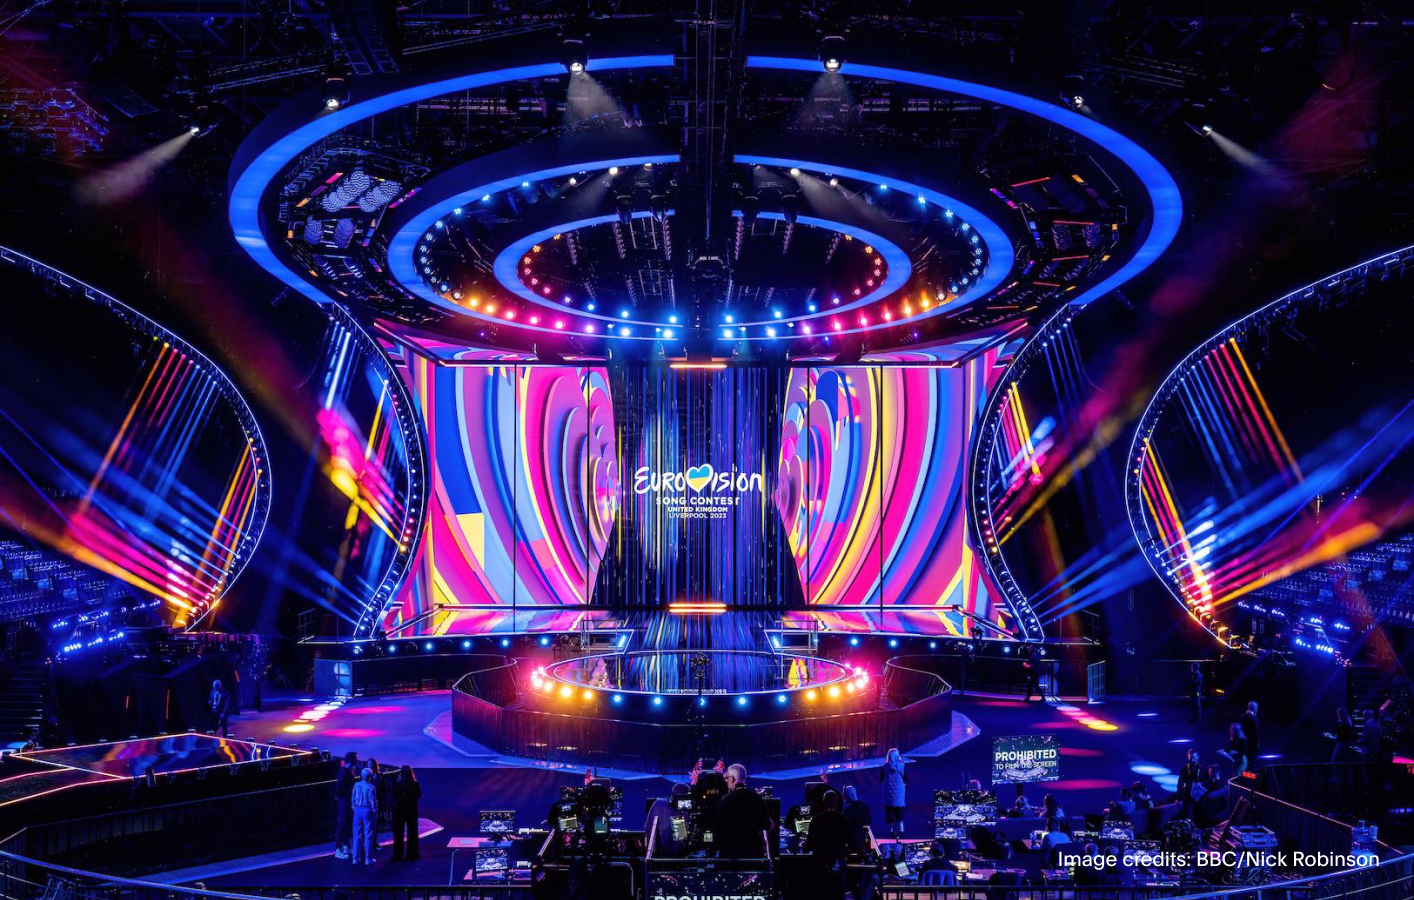 disguise powers complex stage management for the 2023 Eurovision Song Contest